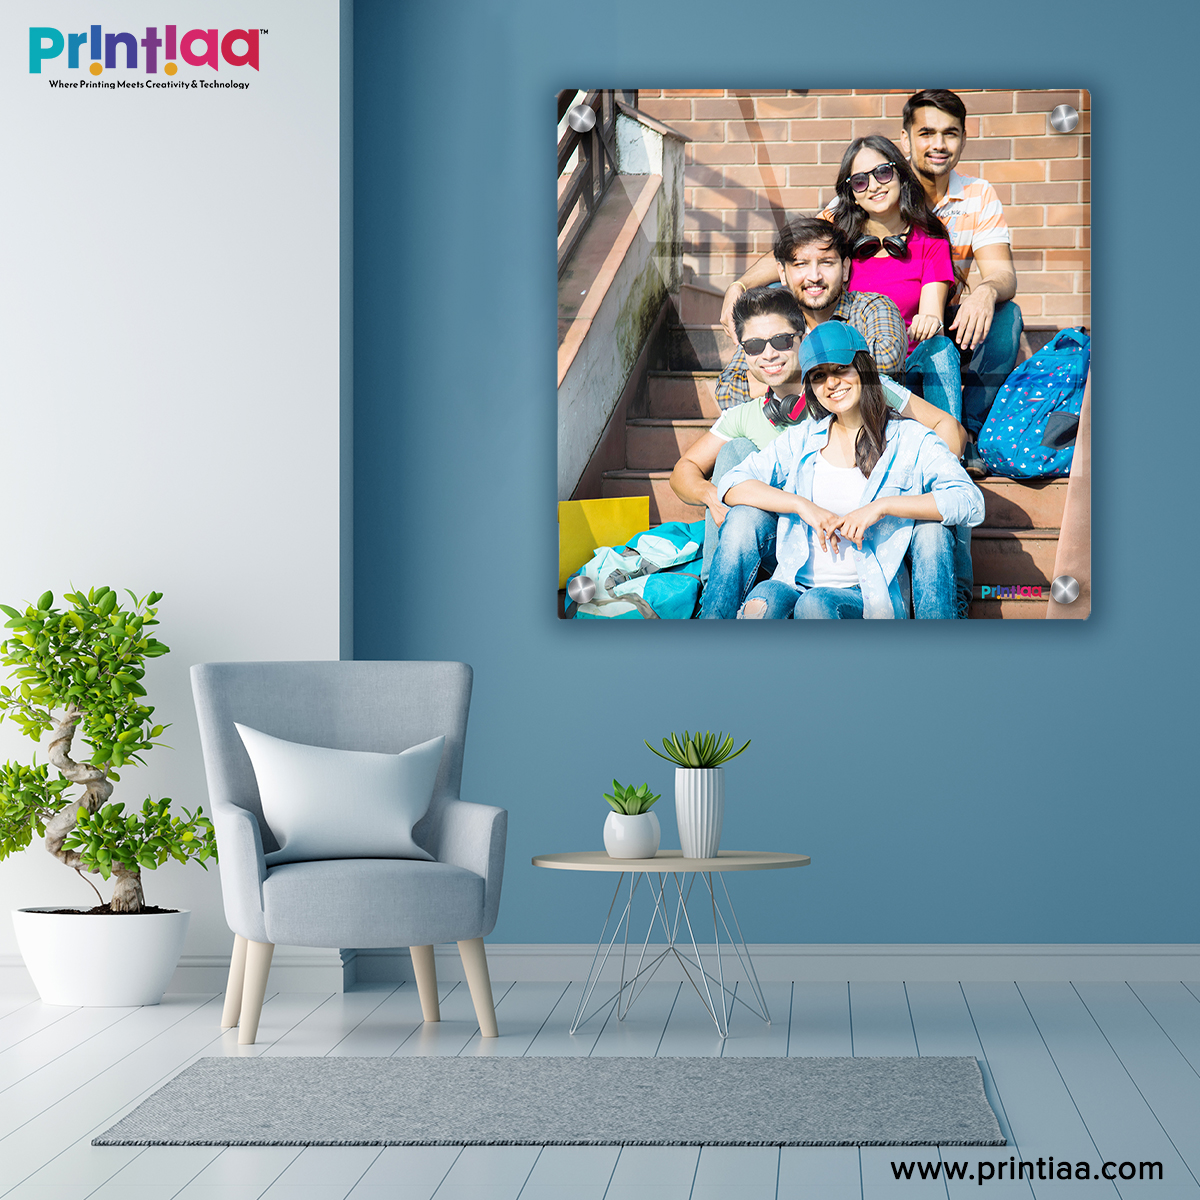 Transform your walls into a gallery of emotions with our stunning acrylic prints.
#acrylicprinting, #acrylicart, #acrylicprints, #acrylicpainting, #acryliconcanvas, #acrylicdesign, #acrylicsigns, #acrylicphoto, #acrylicdisplay, #acryliclettering #delhi #india #printiaa #printing